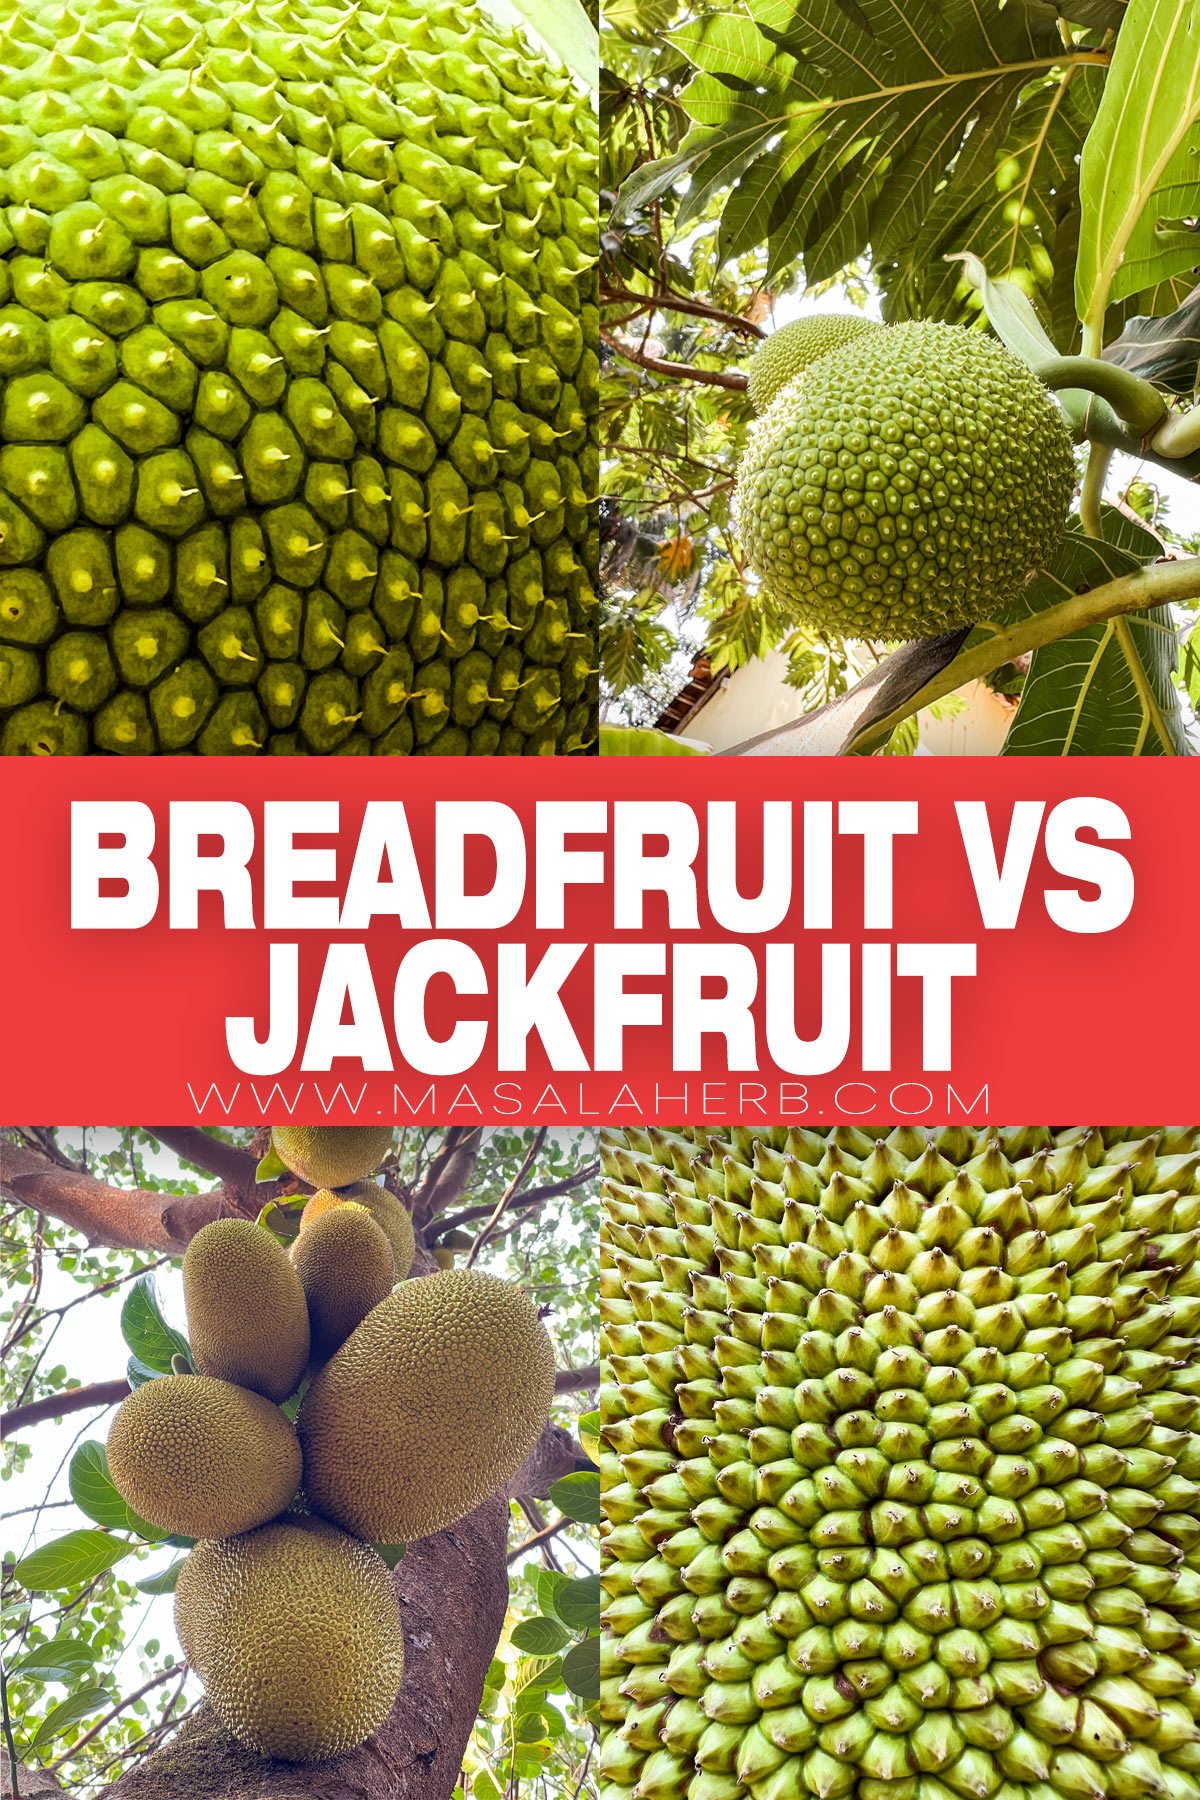 Breadfruit VS Jackfruit: What's the difference? pin image